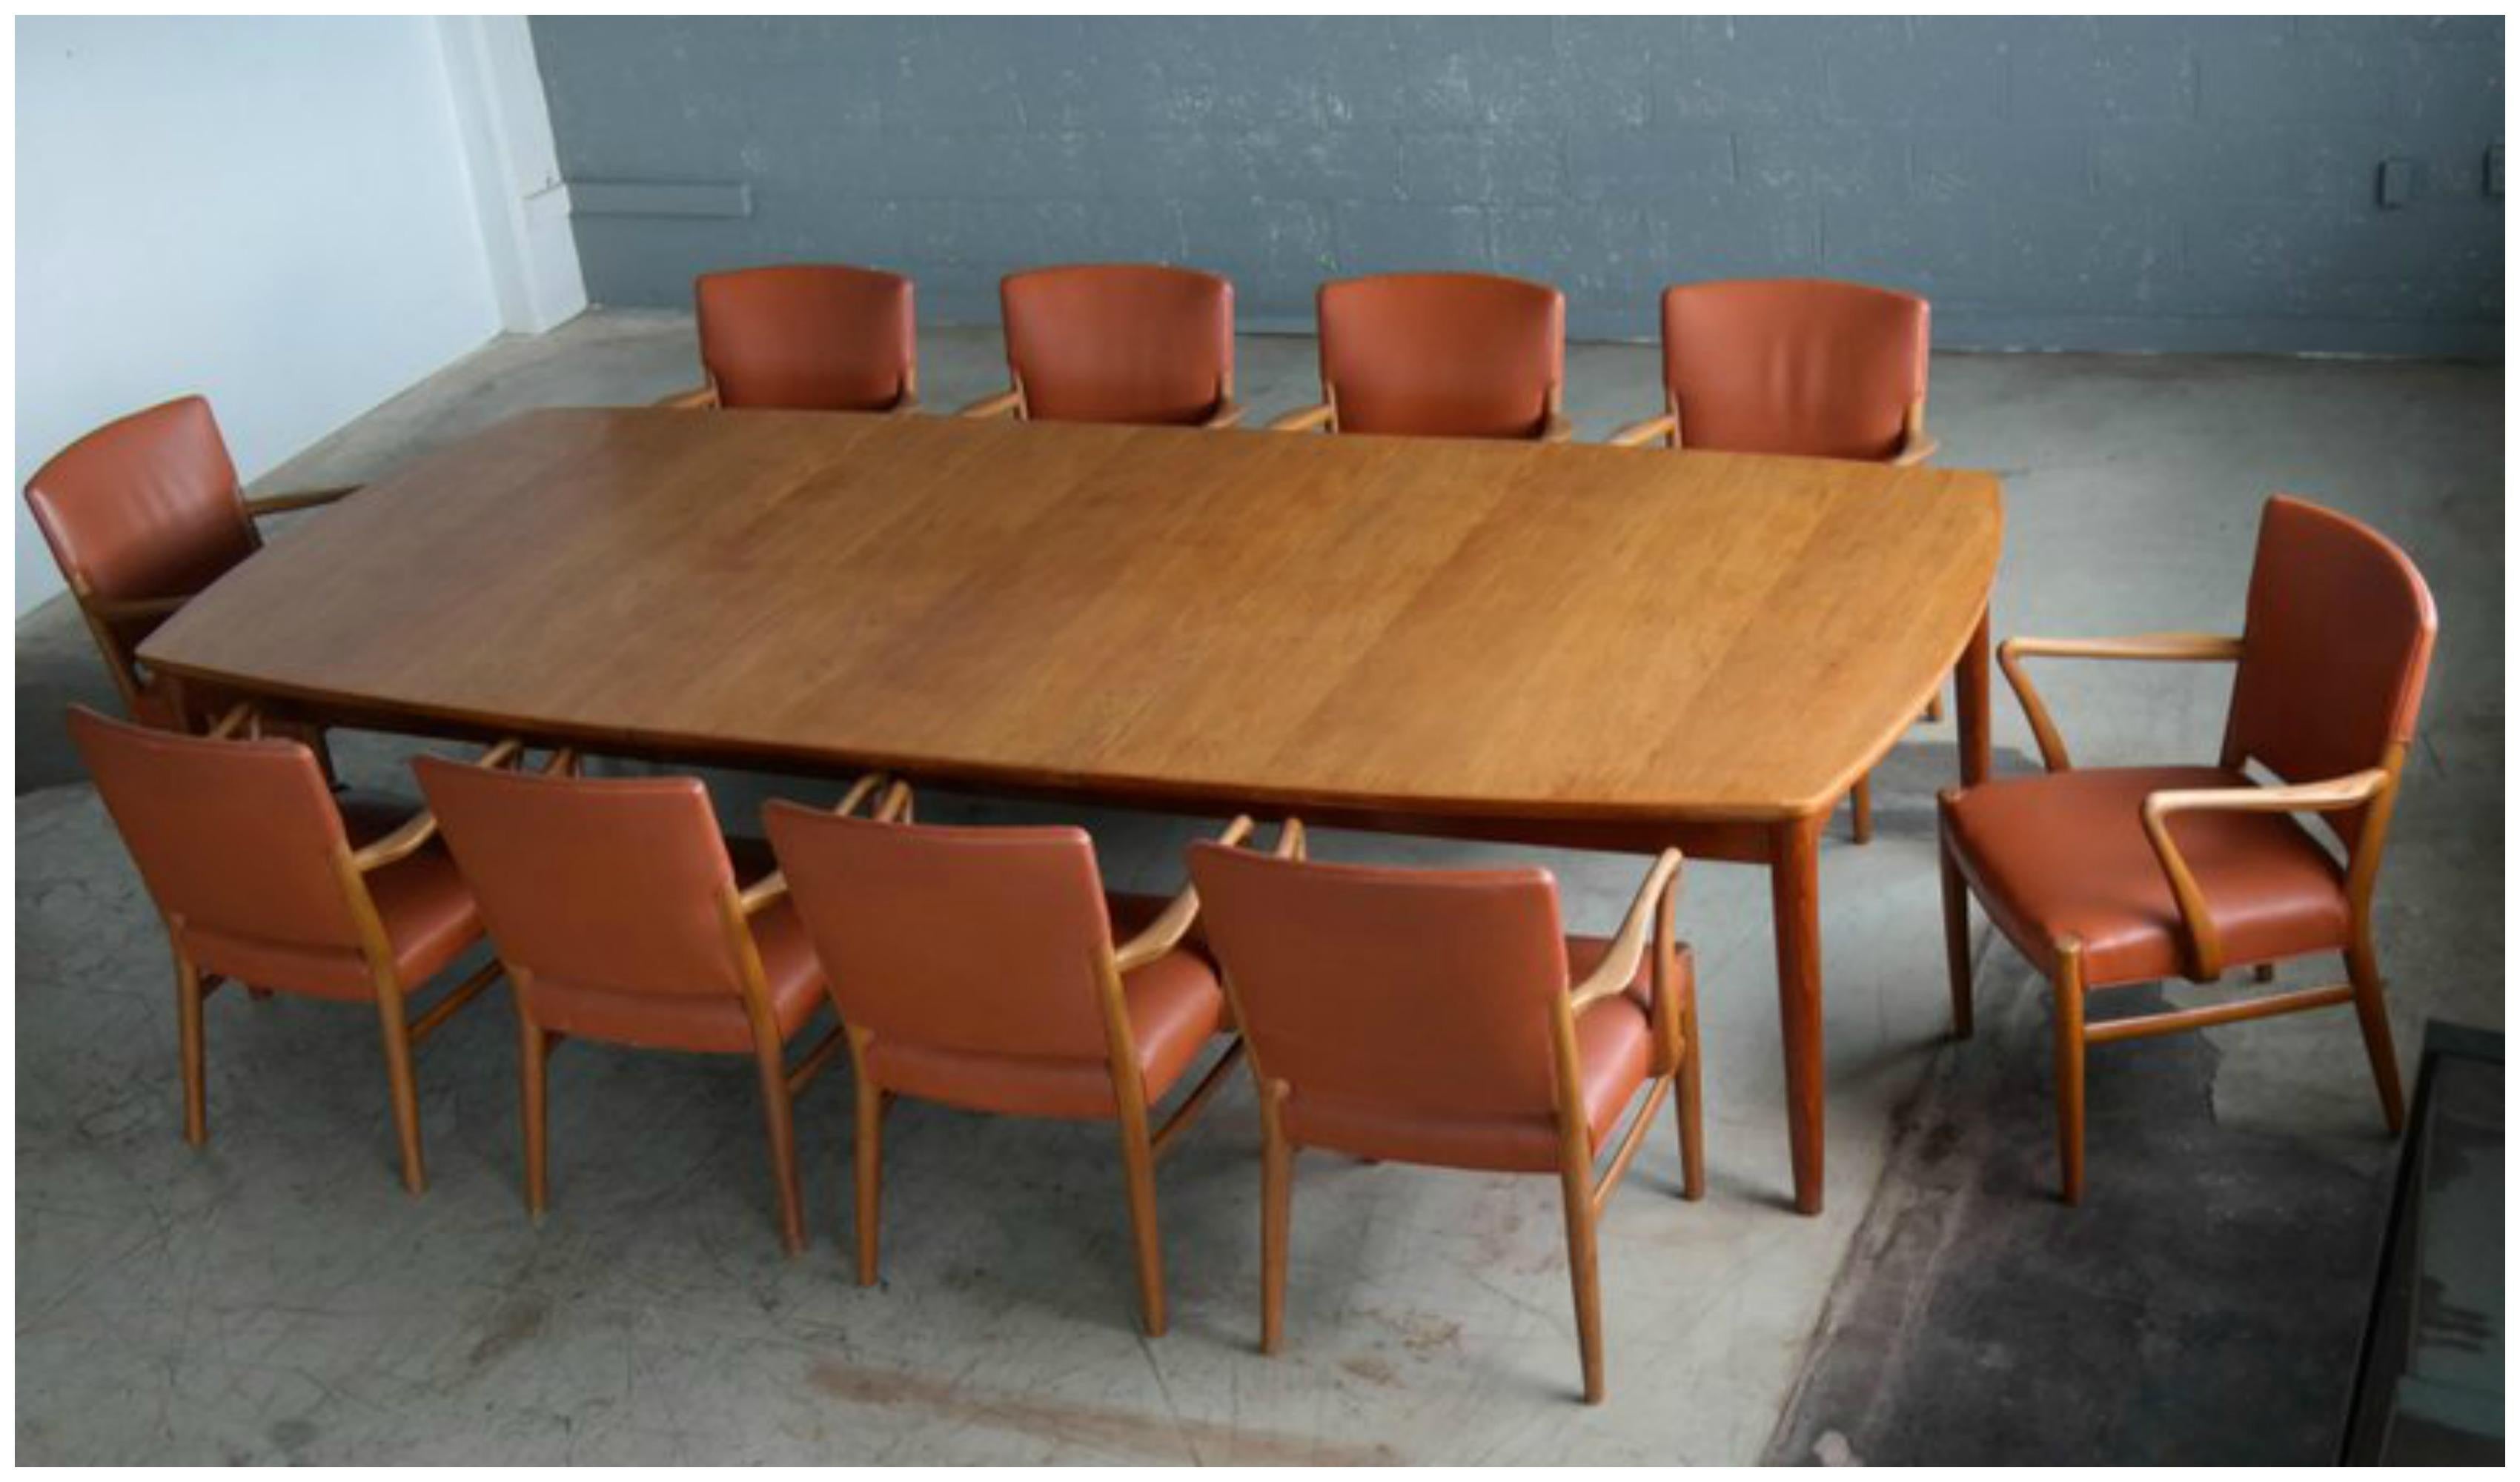 Large Midcentury Danish Sixteen Person Teak Dining or Conference Table 1